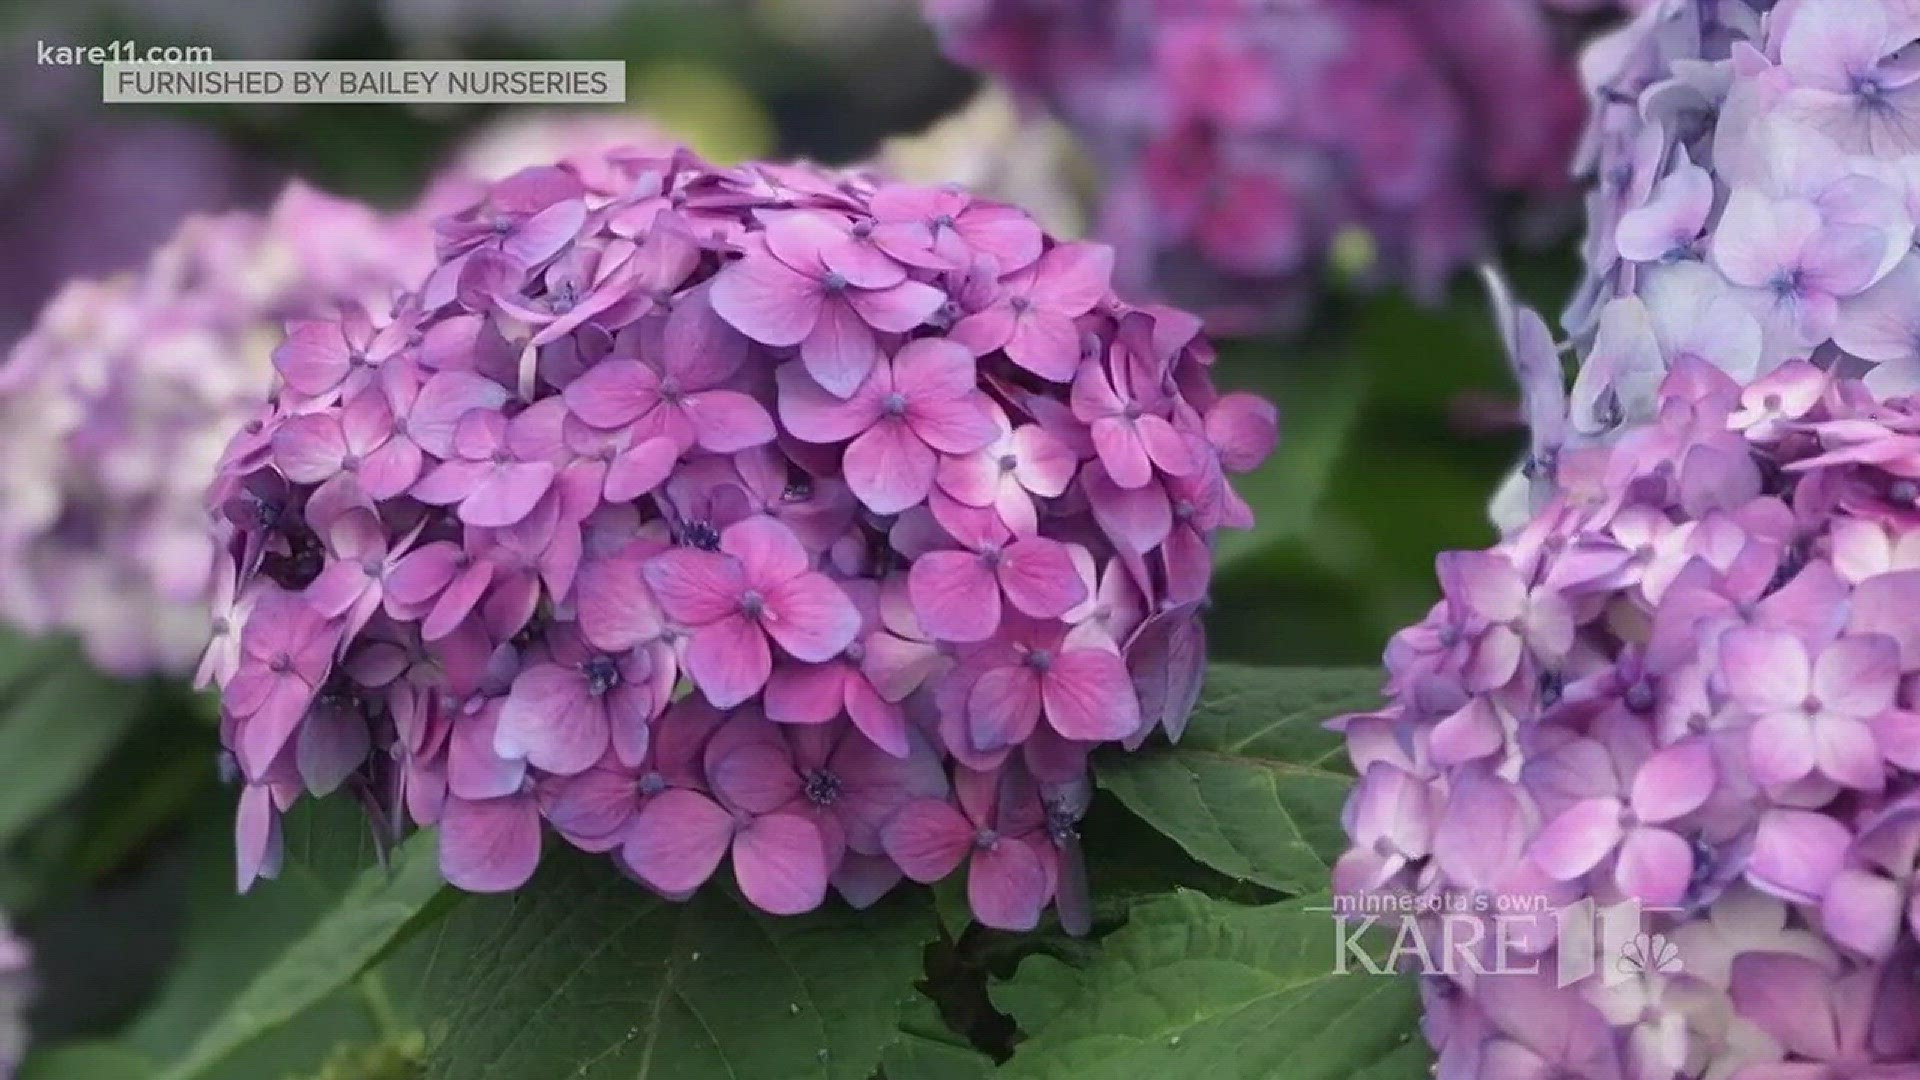 Endless Summer hydrangeas is the world's first and best selling collection of re-blooming hydrangea... and it's the official Super Bowl flower this year. http://kare11.tv/2nxxBDY